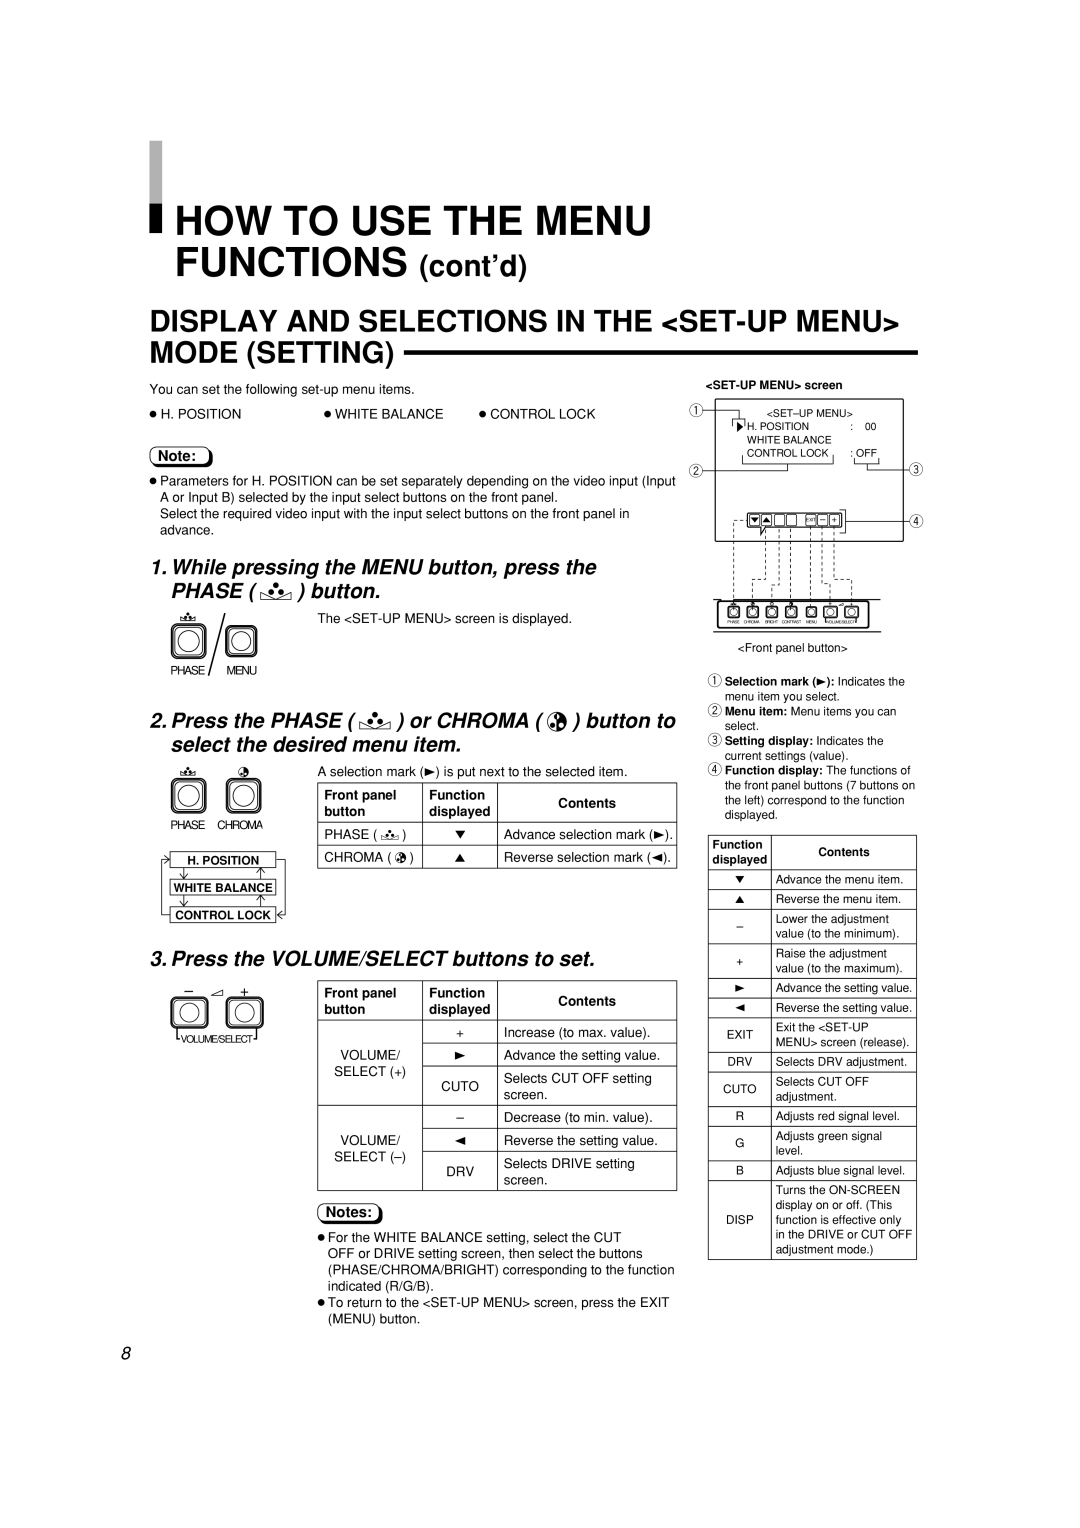 JVC LCT2141-001A-H manual HOW TO USE THE MENU FUNCTIONS cont’d, Display And Selections In The Set-Up Menu Mode Setting 